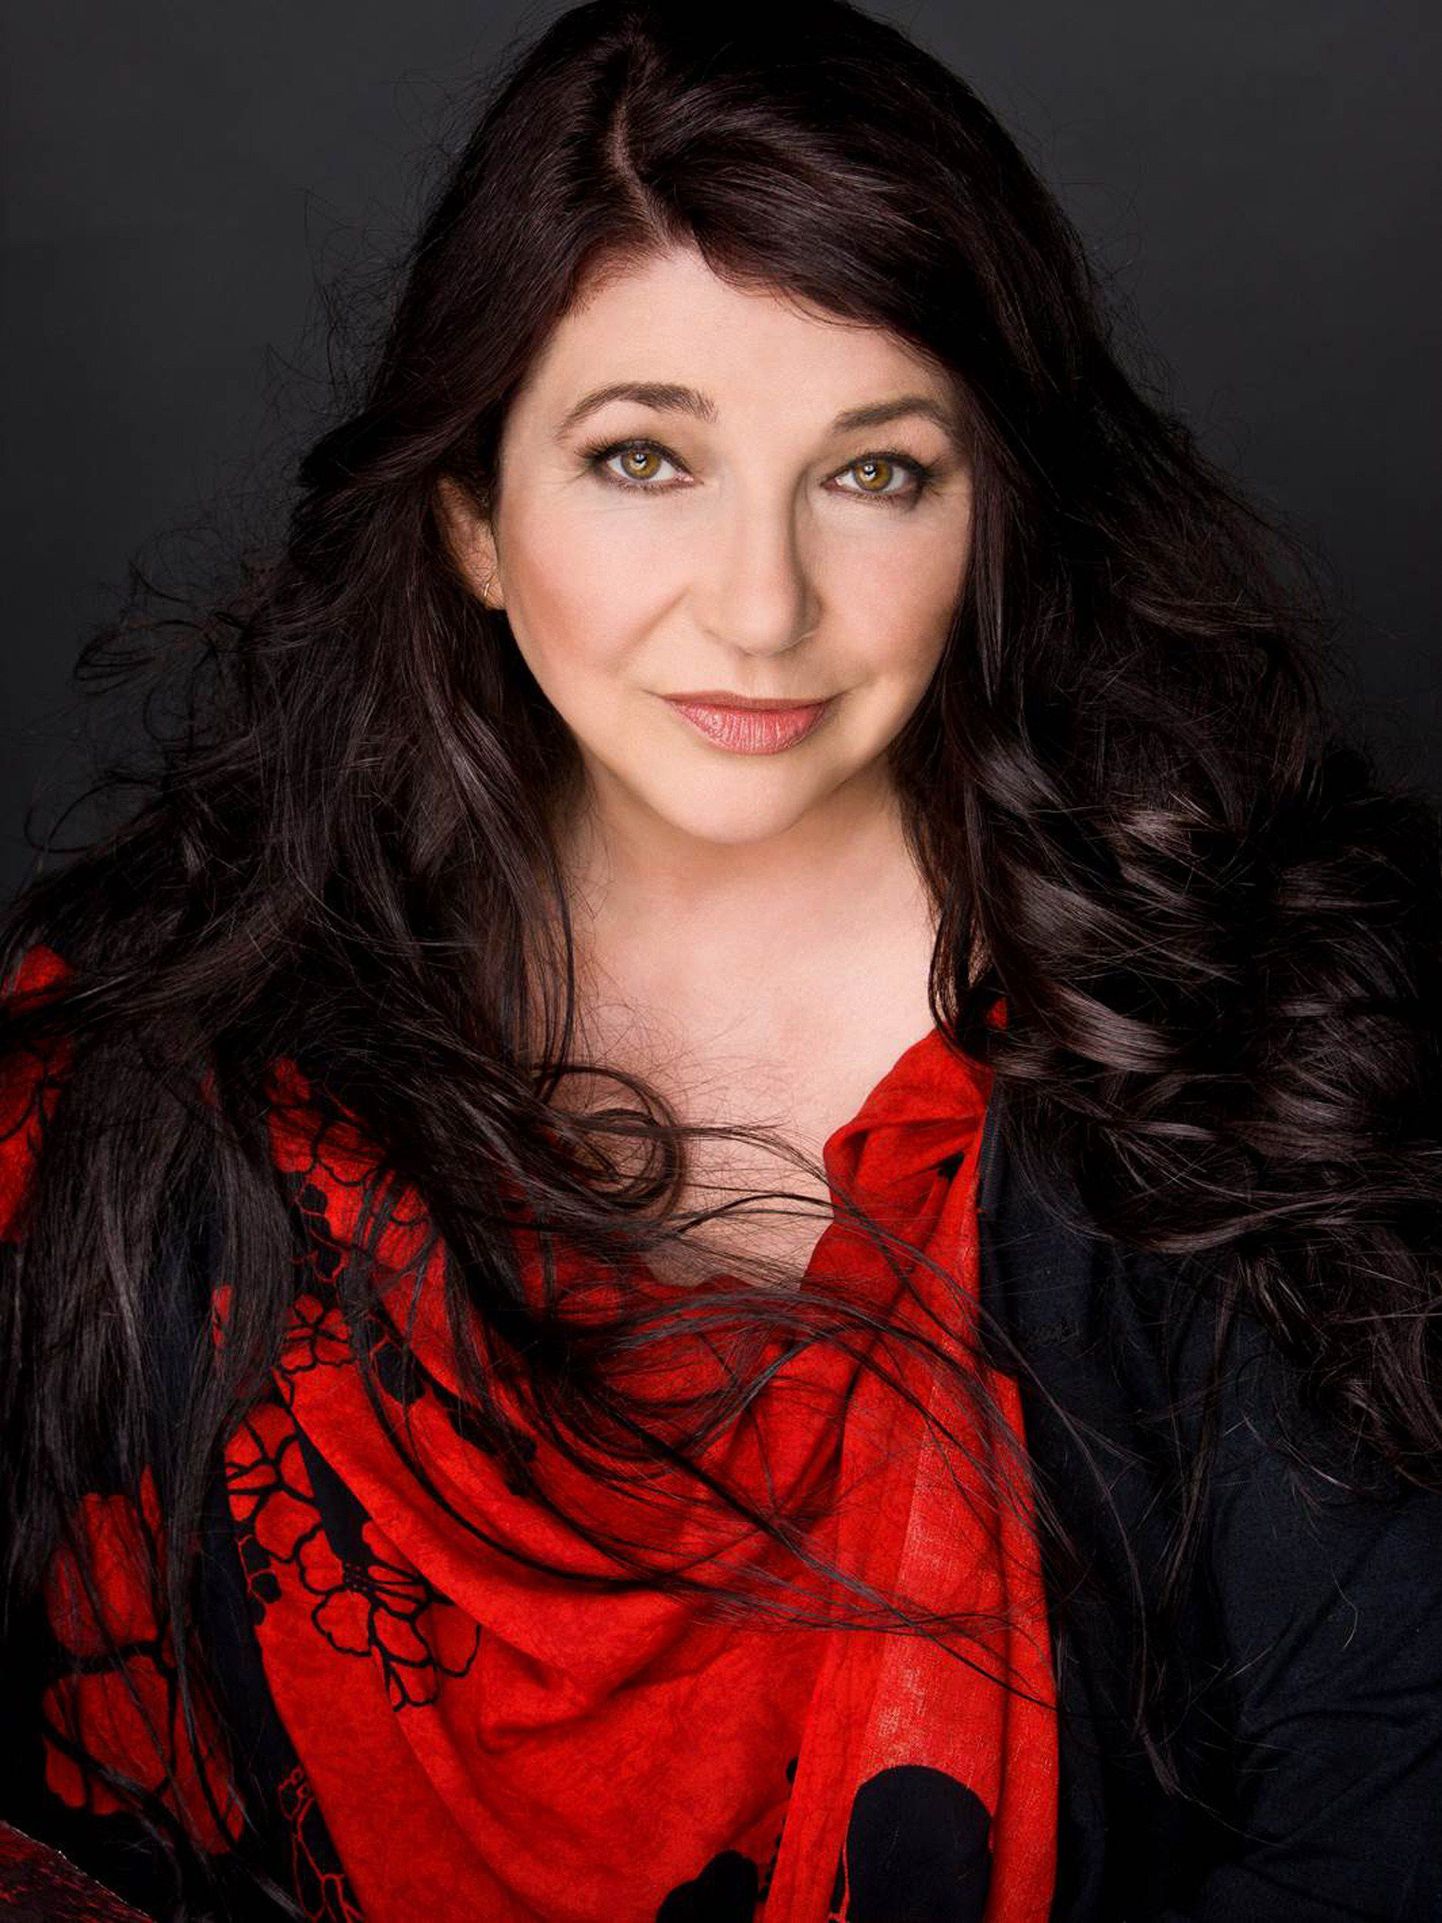 An undated handout picture released by the Fish People record label on March 21, 2014 shows British musician Kate Bush posing at an undisclosed location. British singer Kate Bush on March 21, 2014 announced a surprise series of live shows in London later in 2014, 35 years after her one and only tour. The 55-year-old, who recently launched a new album, "50 Words For Snow", will play 15 dates at the Hammersmith Apollo in August and September. RESTRICTED TO EDITORIAL USE - MANDATORY CREDIT  " AFP PHOTO / FISH PEOPLE /  TREVOR LEIGHTON "  -  NO MARKETING NO ADVERTISING CAMPAIGNS   -   DISTRIBUTED AS A SERVICE TO CLIENTS